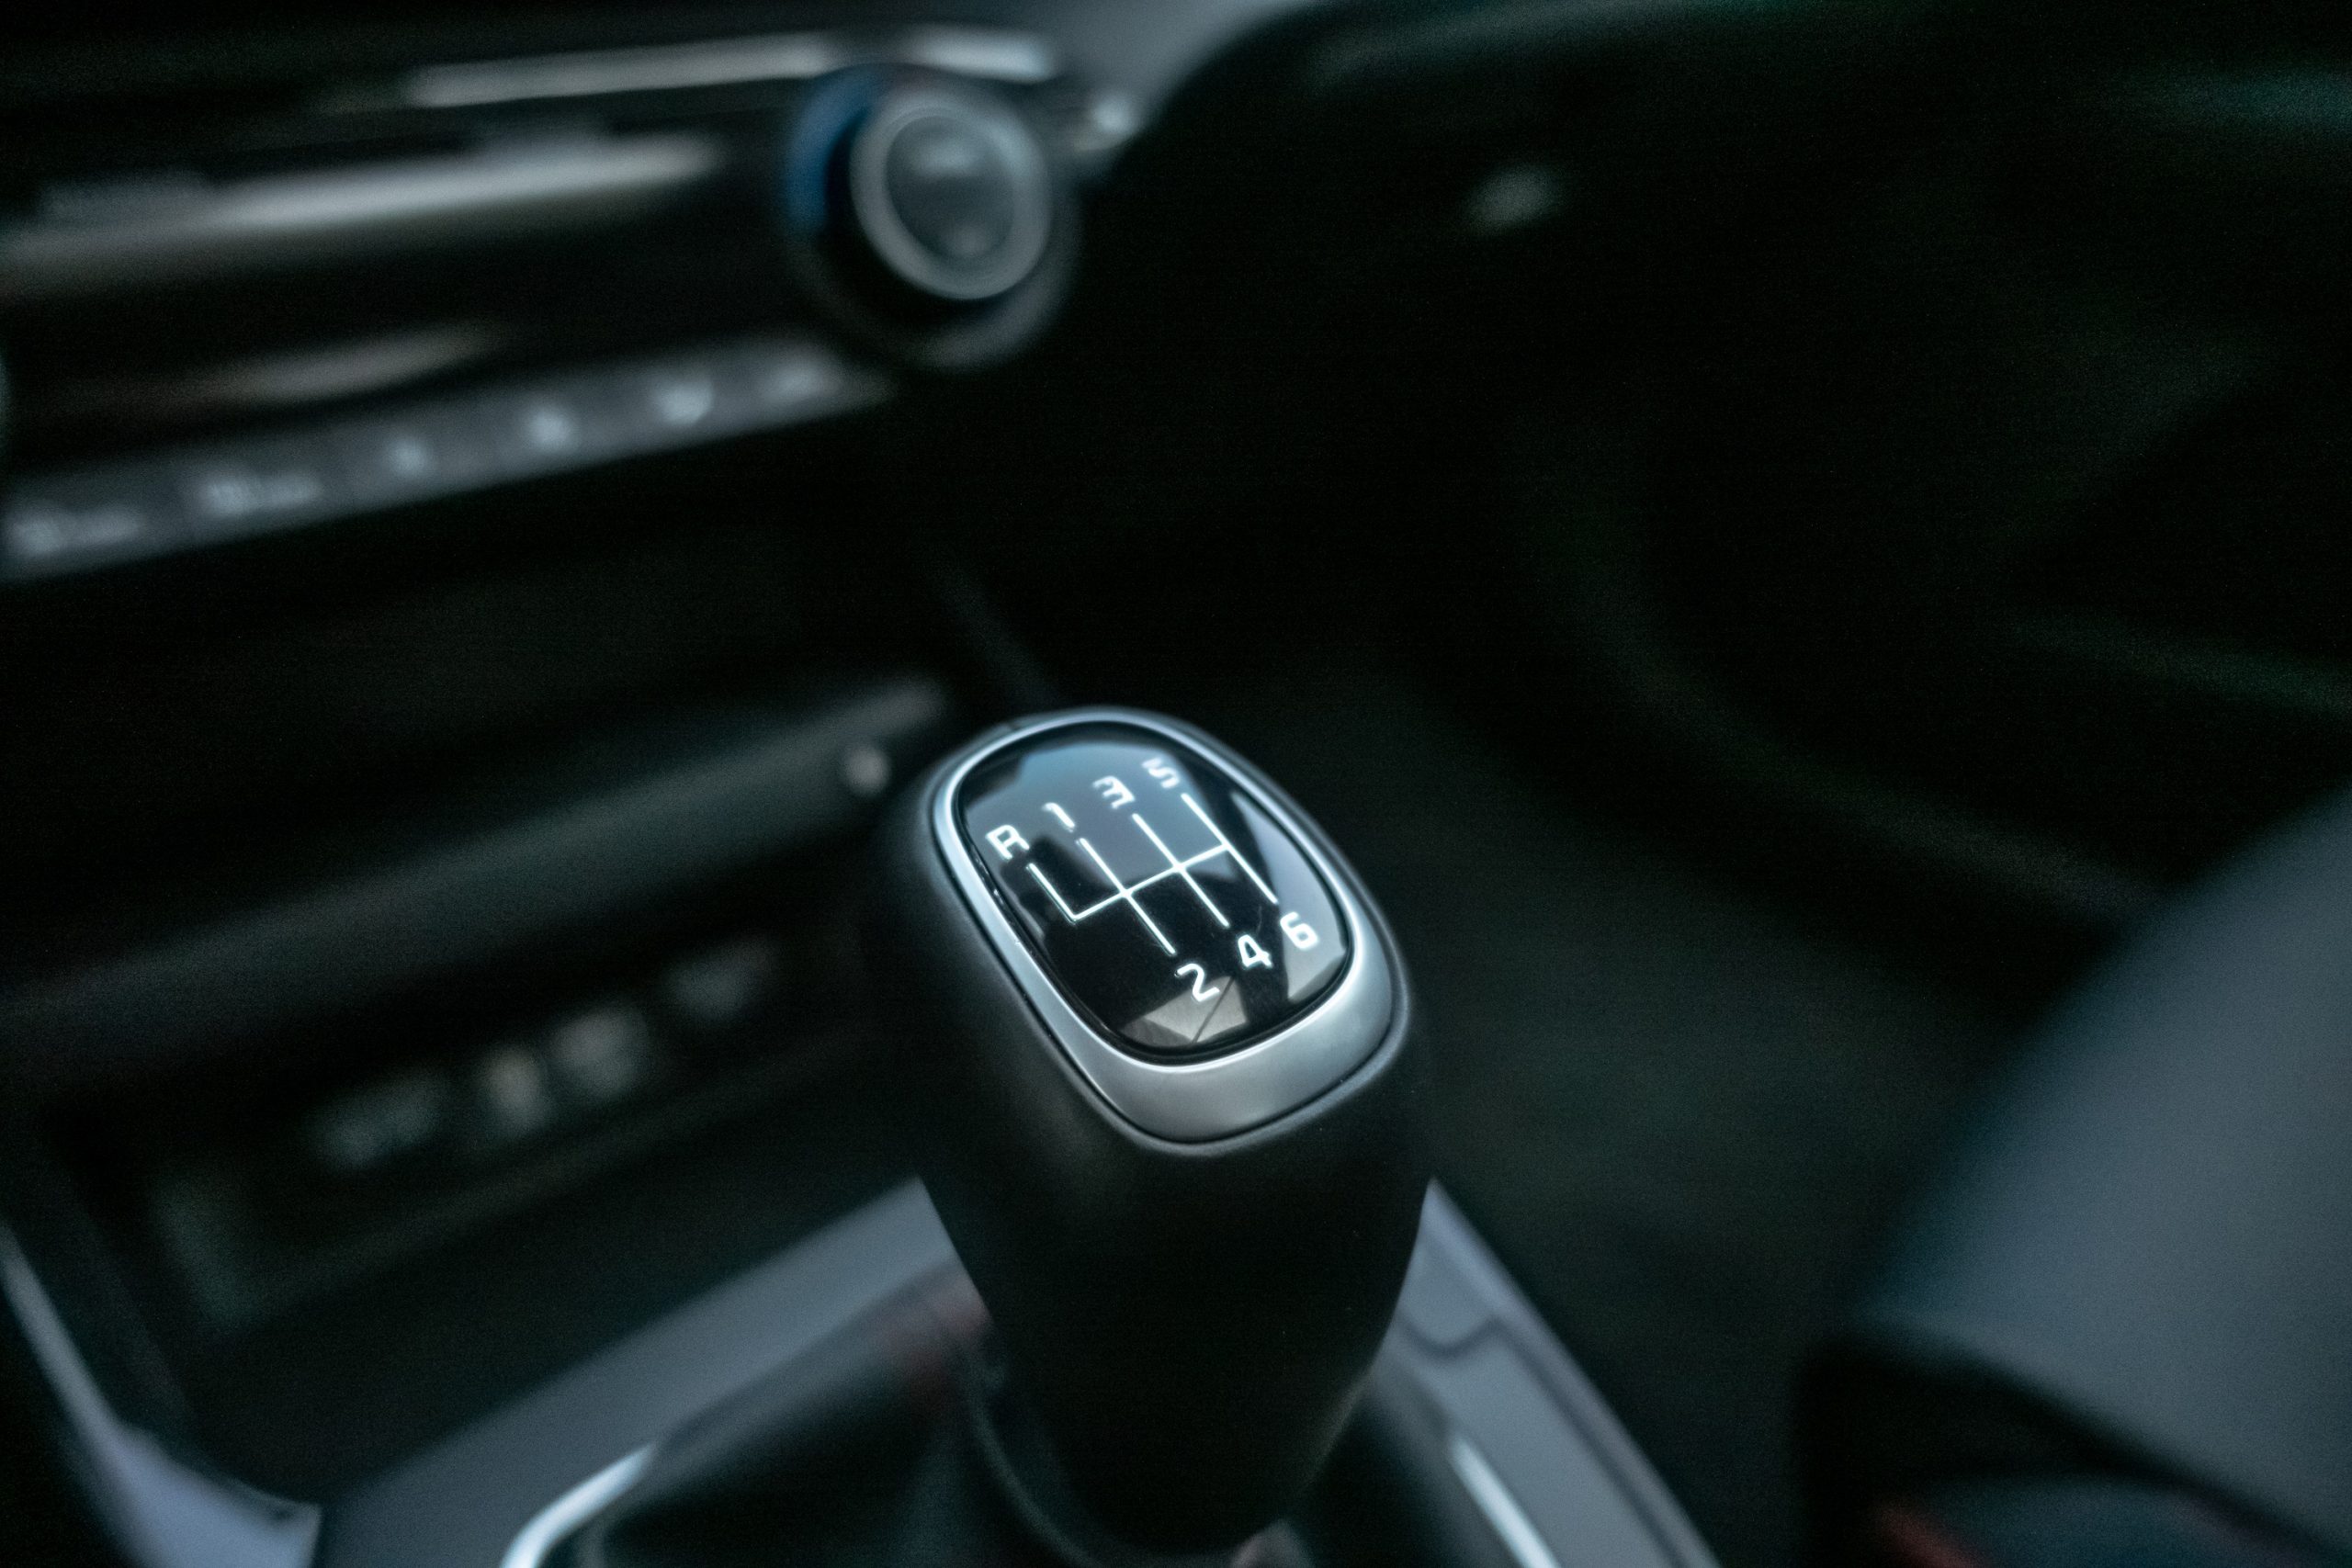 The manual transmission in the new Kia Forte